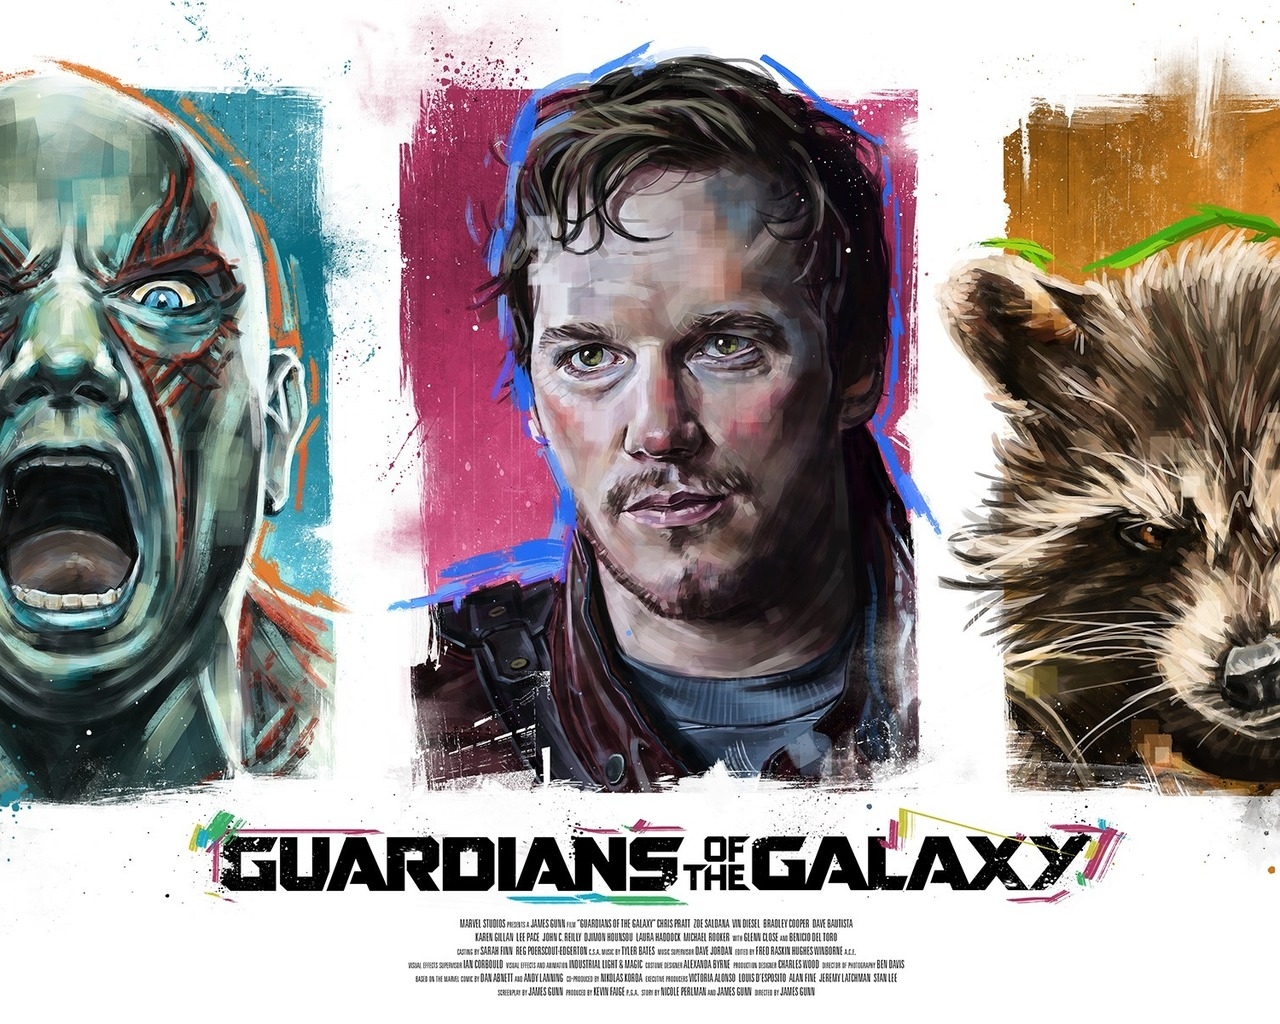 Guardians of the Galaxy Poster Artwork for 1280 x 1024 resolution